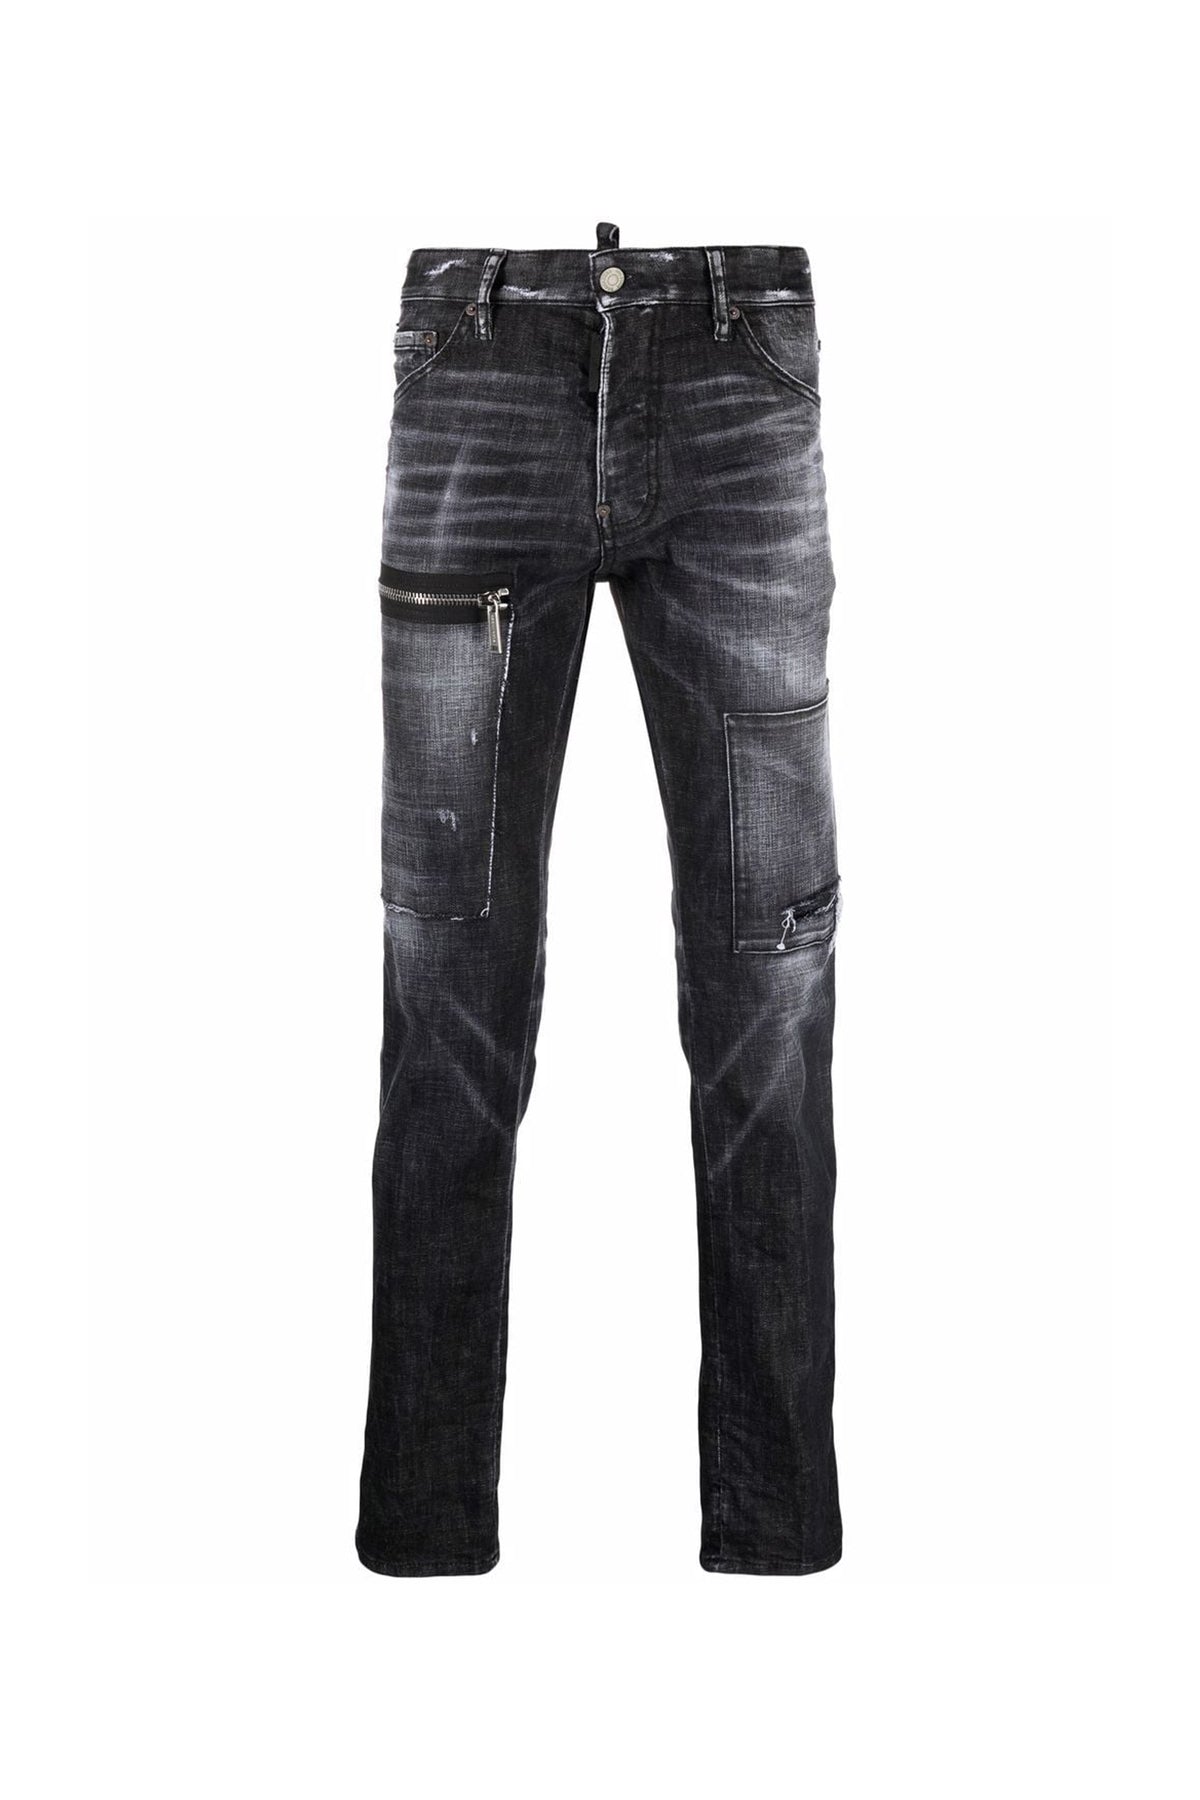 Dsquared2 distressed-effect jeans